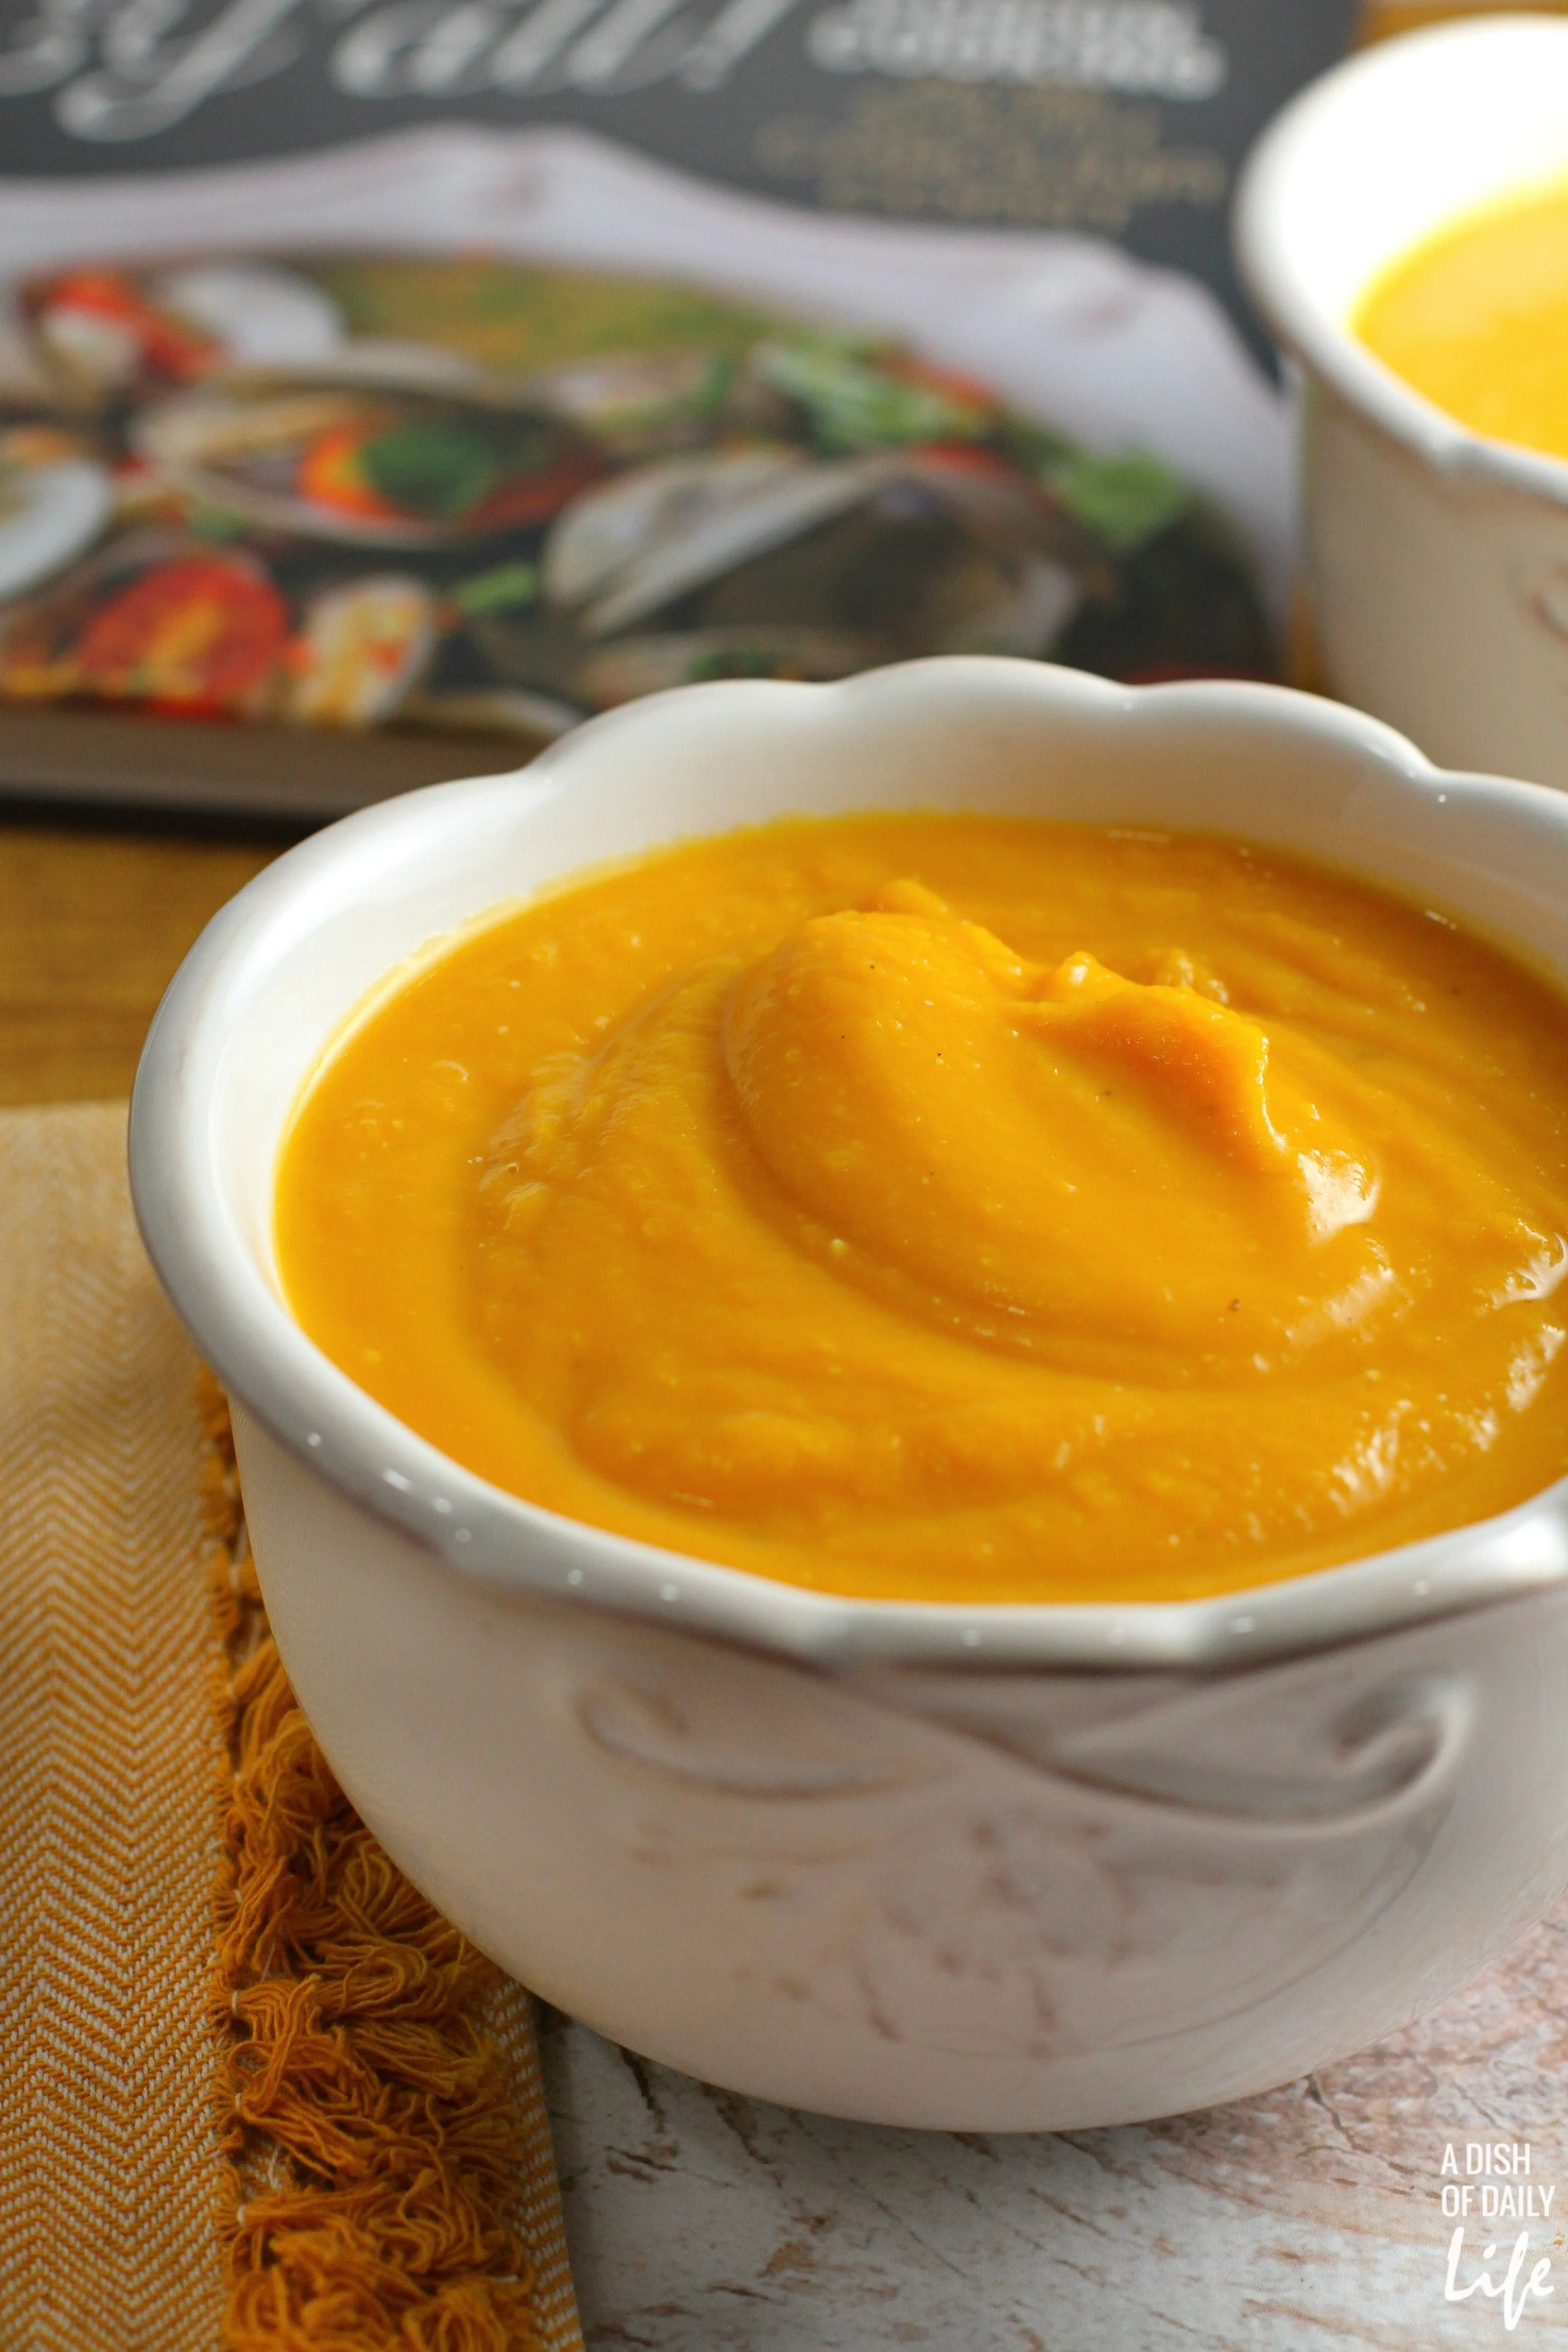 This delicious easy Butternut Squash Soup recipe is perfect for your fall, winter or holiday dinner menu! It's smooth and rich, with gourmet taste, yet simple to make, with only 6 ingredients! Freeze any leftovers for later.